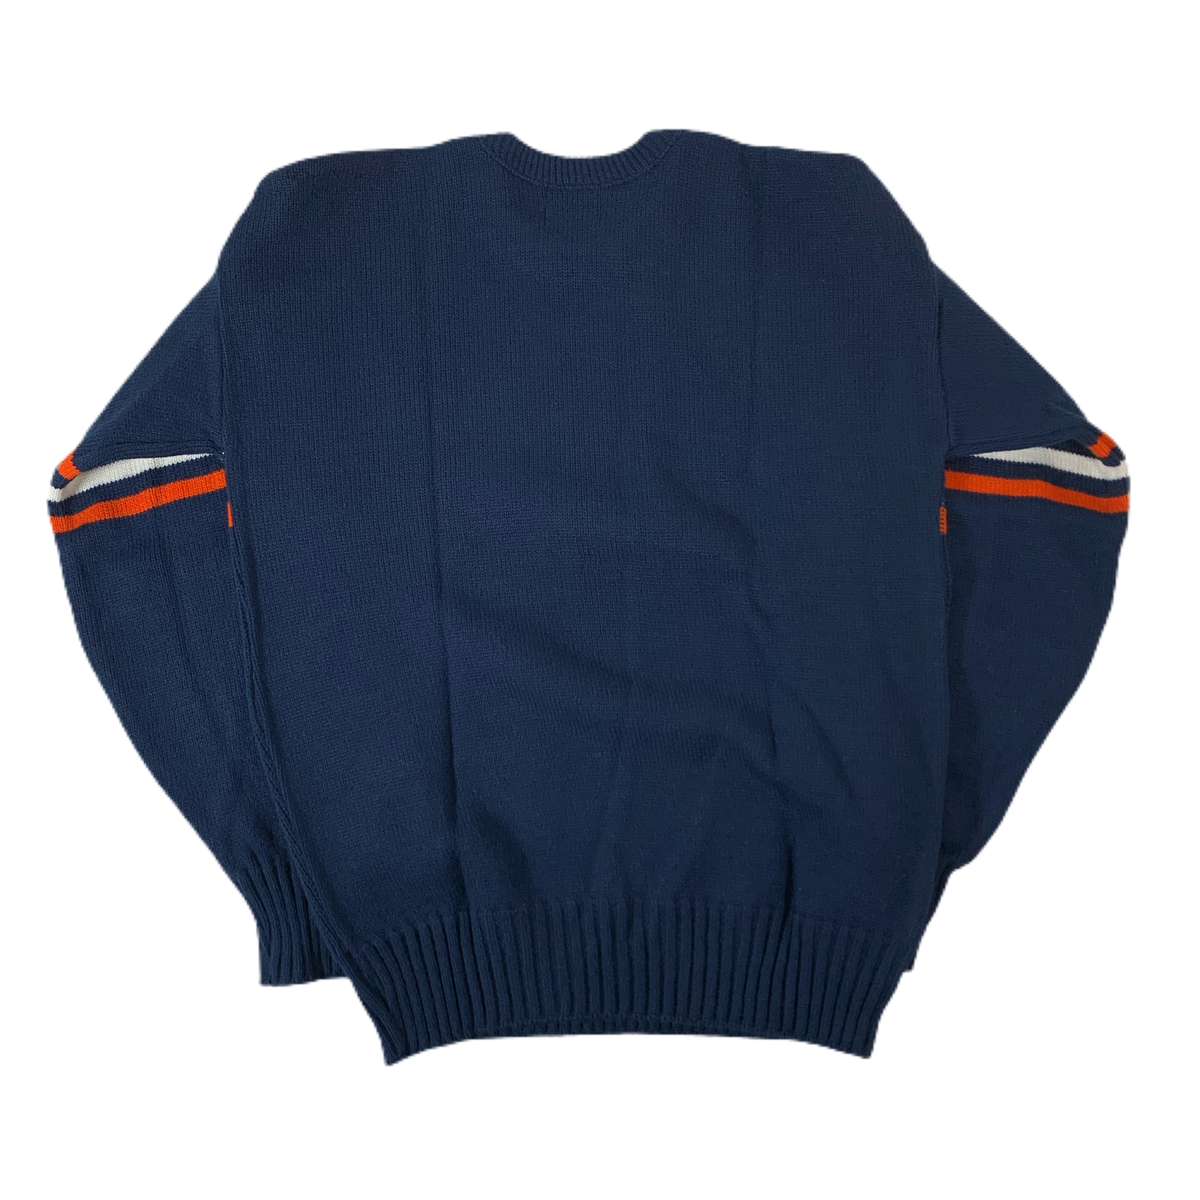 Vintage Chicago Bears “Cliff Engle” Knit Sweater - jointcustodydc